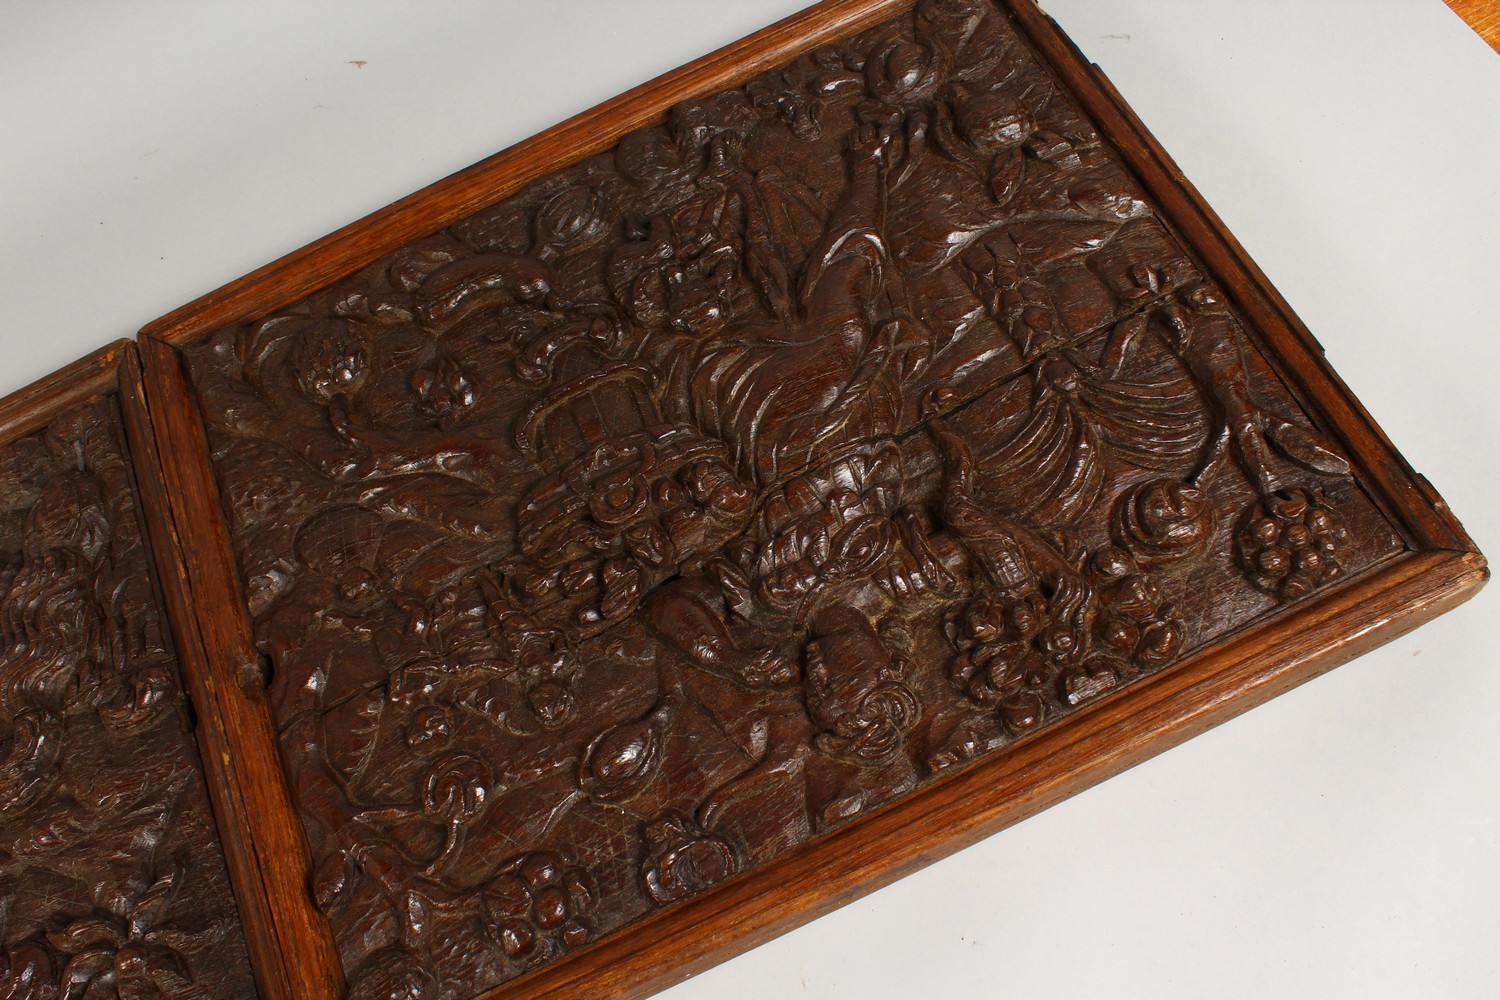 A GOOD PAIR OF EARLY CARVED OAK PANELS, POSSIBLY 17TH CENTURY, depicting female figures, children, - Image 3 of 4